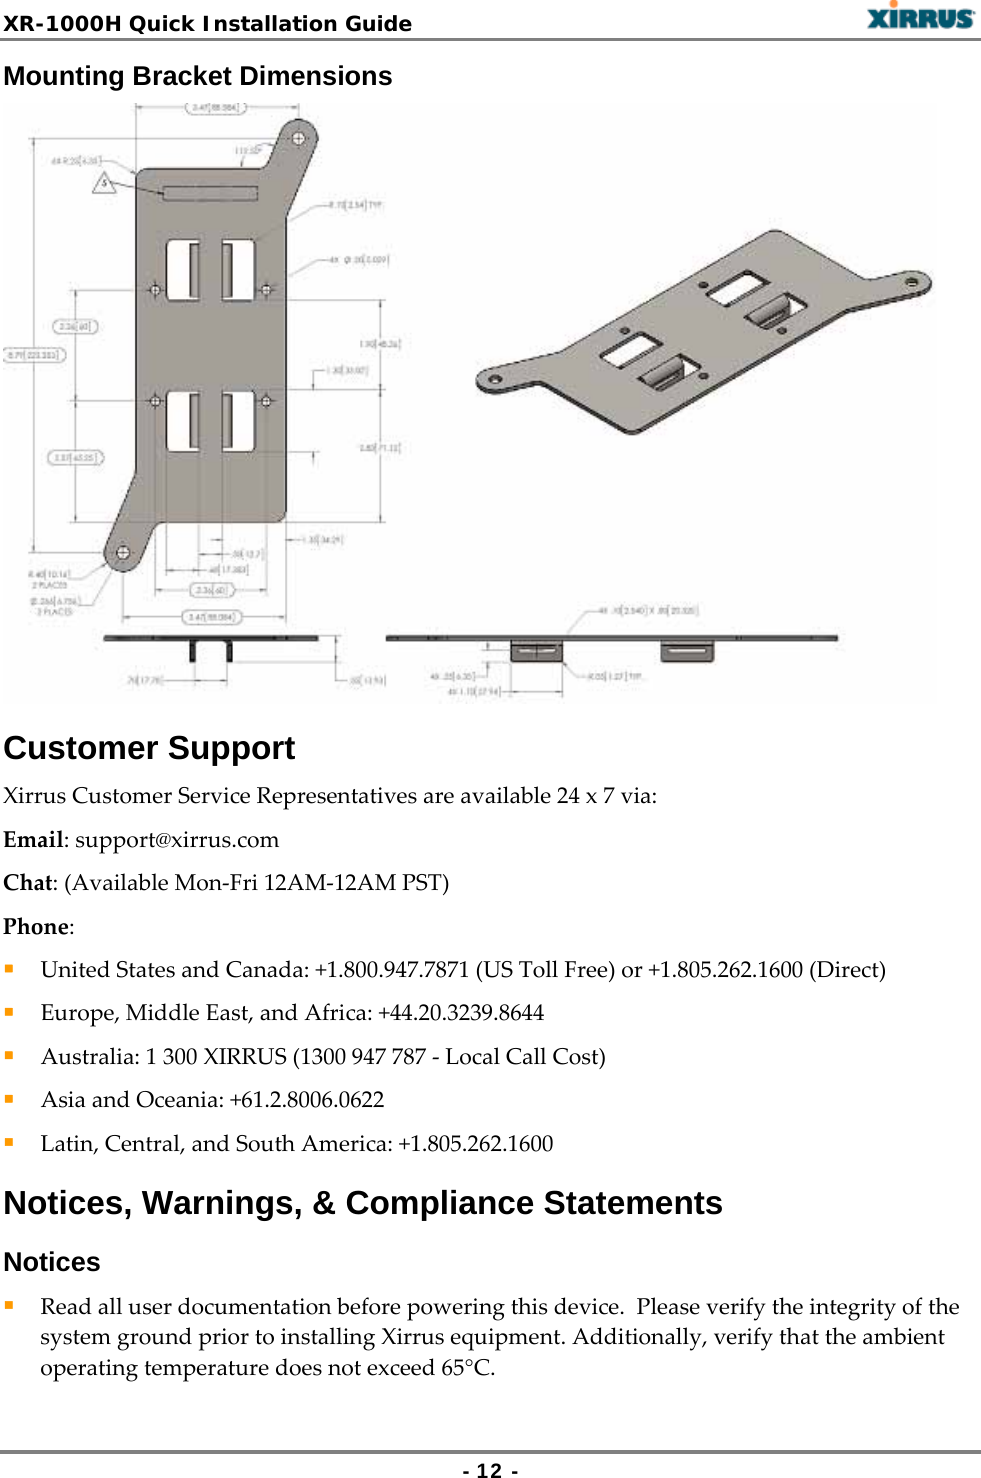 XR-1000H Quick Installation Guide   - 12 - Mounting Bracket Dimensions Customer Support XirrusCustomerServiceRepresentativesareavailable24x7via:Email:support@xirrus.comChat:(AvailableMon‐Fri12AM‐12AMPST)Phone: UnitedStatesandCanada:+1.800.947.7871(USTollFree)or+1.805.262.1600(Direct) Europe,MiddleEast,andAfrica:+44.20.3239.8644 Australia:1300XIRRUS(1300947787‐LocalCallCost) AsiaandOceania:+61.2.8006.0622 Latin,Central,andSouthAmerica:+1.805.262.1600Notices, Warnings, &amp; Compliance Statements Notices  Readalluserdocumentationbeforepoweringthisdevice.PleaseverifytheintegrityofthesystemgroundpriortoinstallingXirrusequipment.Additionally,verifythattheambientoperatingtemperaturedoesnotexceed65°C.